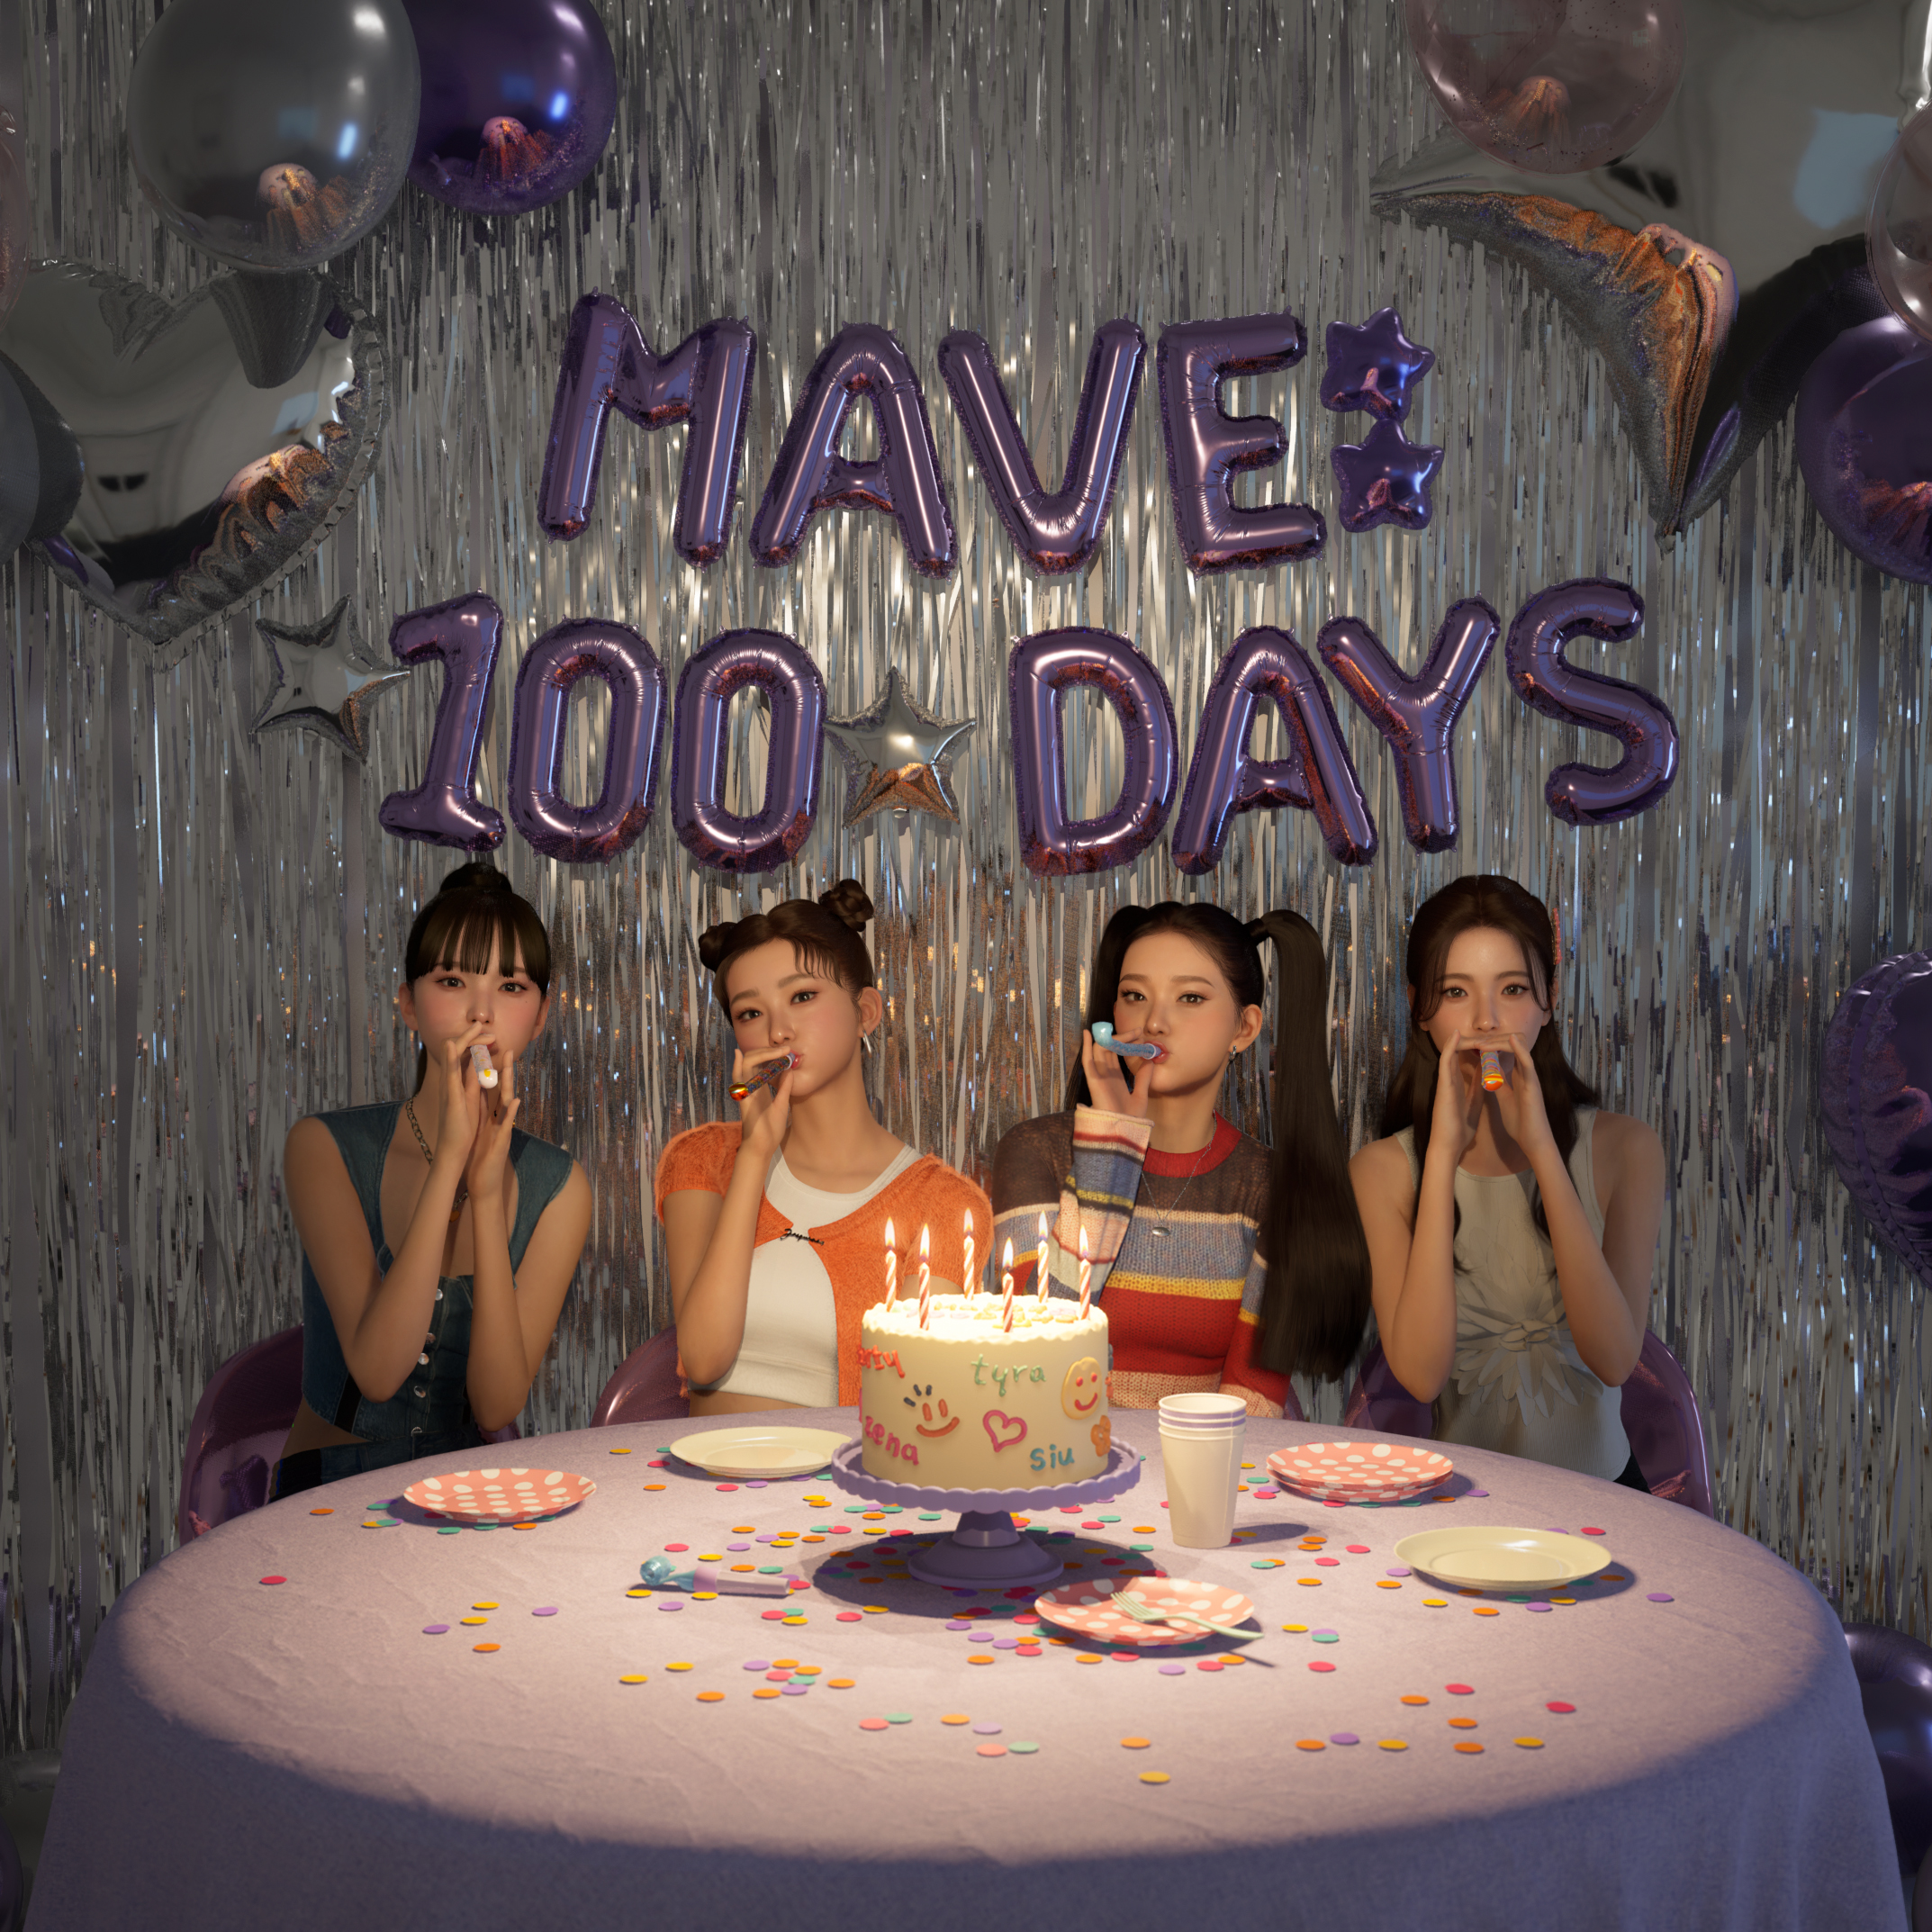 This is MAVE: the K-pop avatar group with millions of views